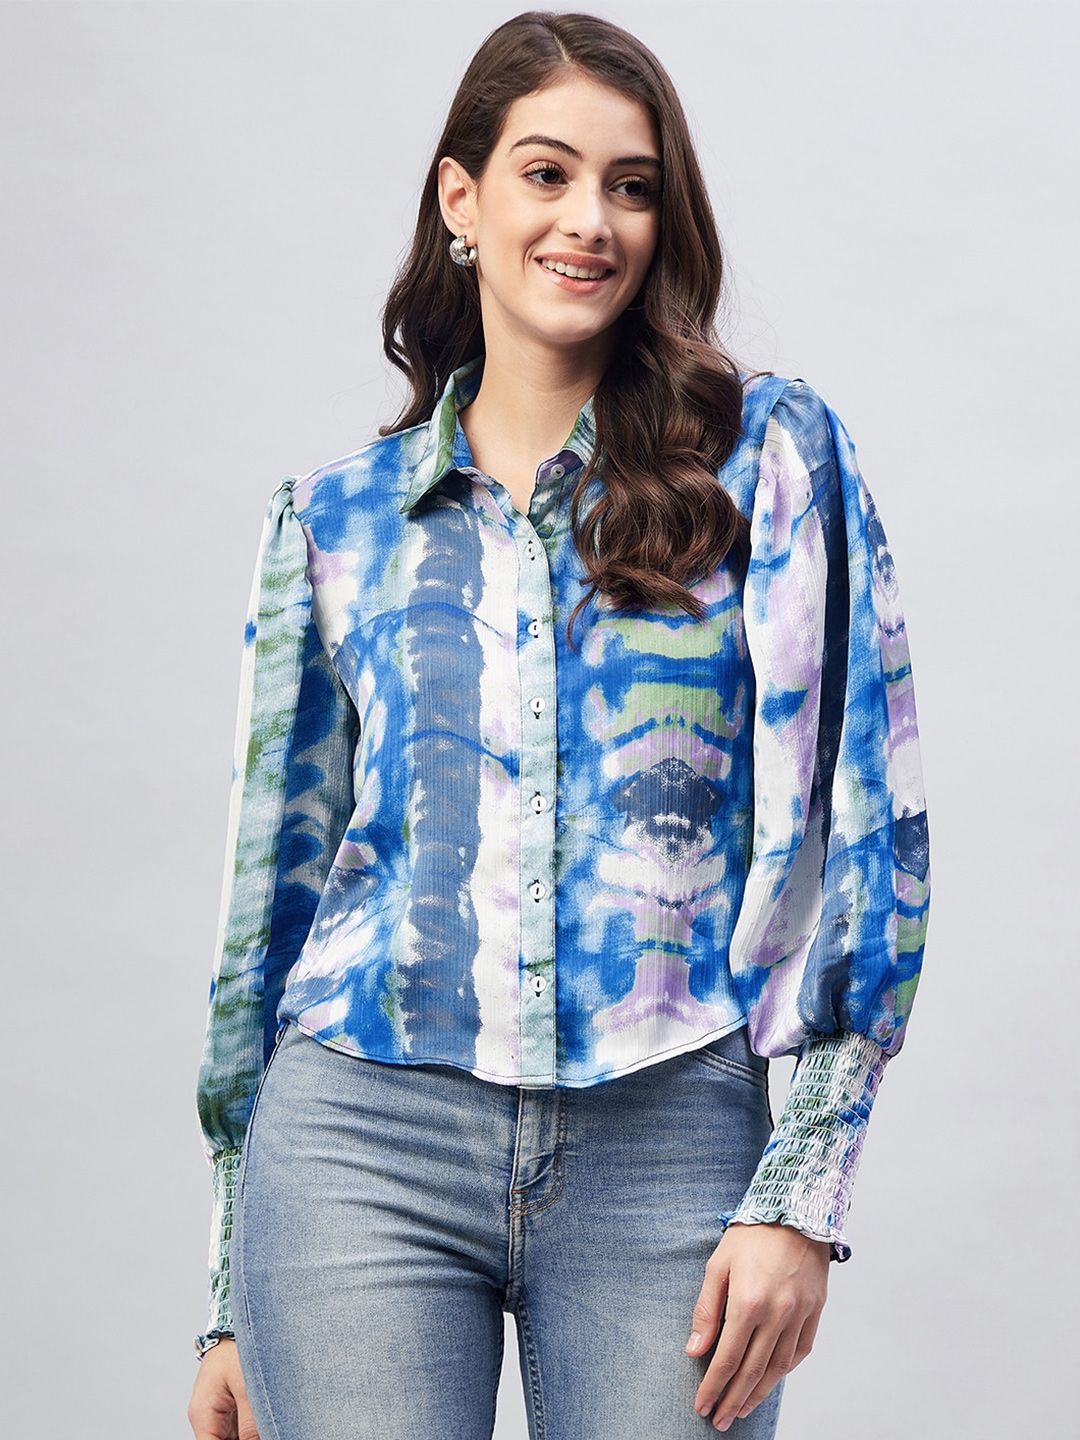 Marie Claire Blue Print Shirt Style Top Price in India